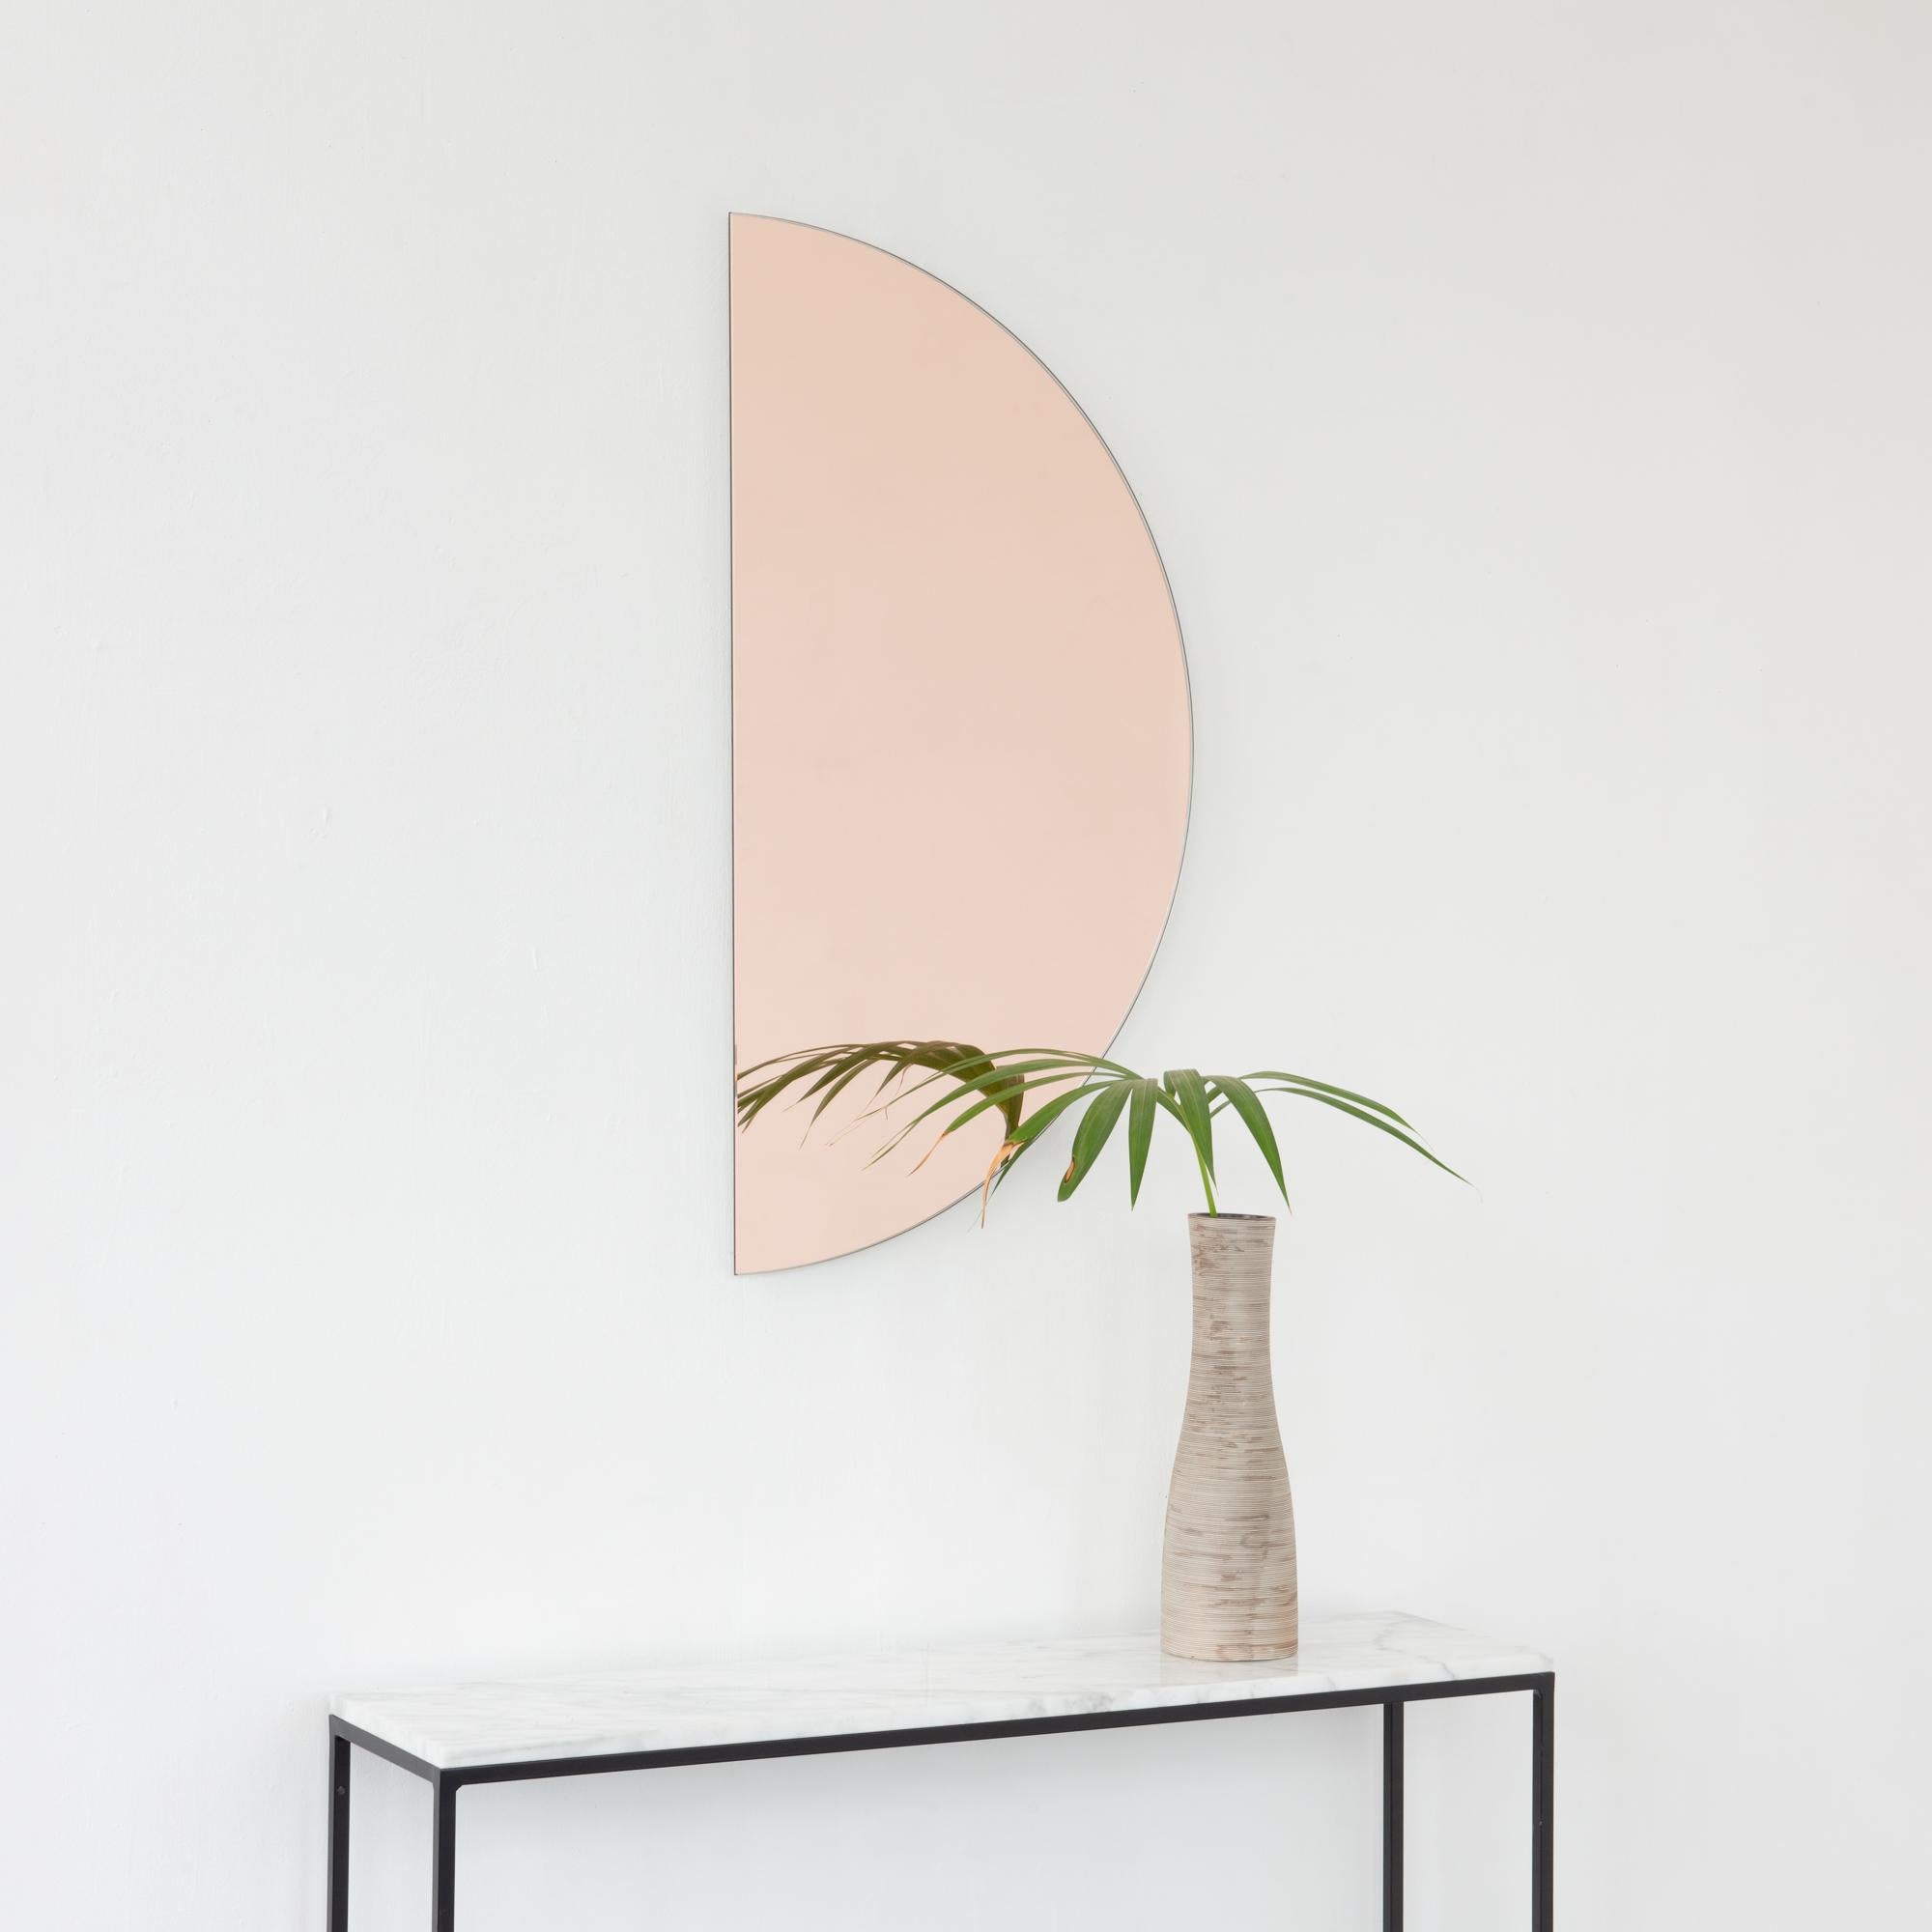 Minimalist half-moon rose gold (peach) tinted frameless mirror with a floating effect. Fitted with a quality hanging system for a flexible installation in 4 different directions. Designed and made in London, UK. 

Our mirrors are designed with an